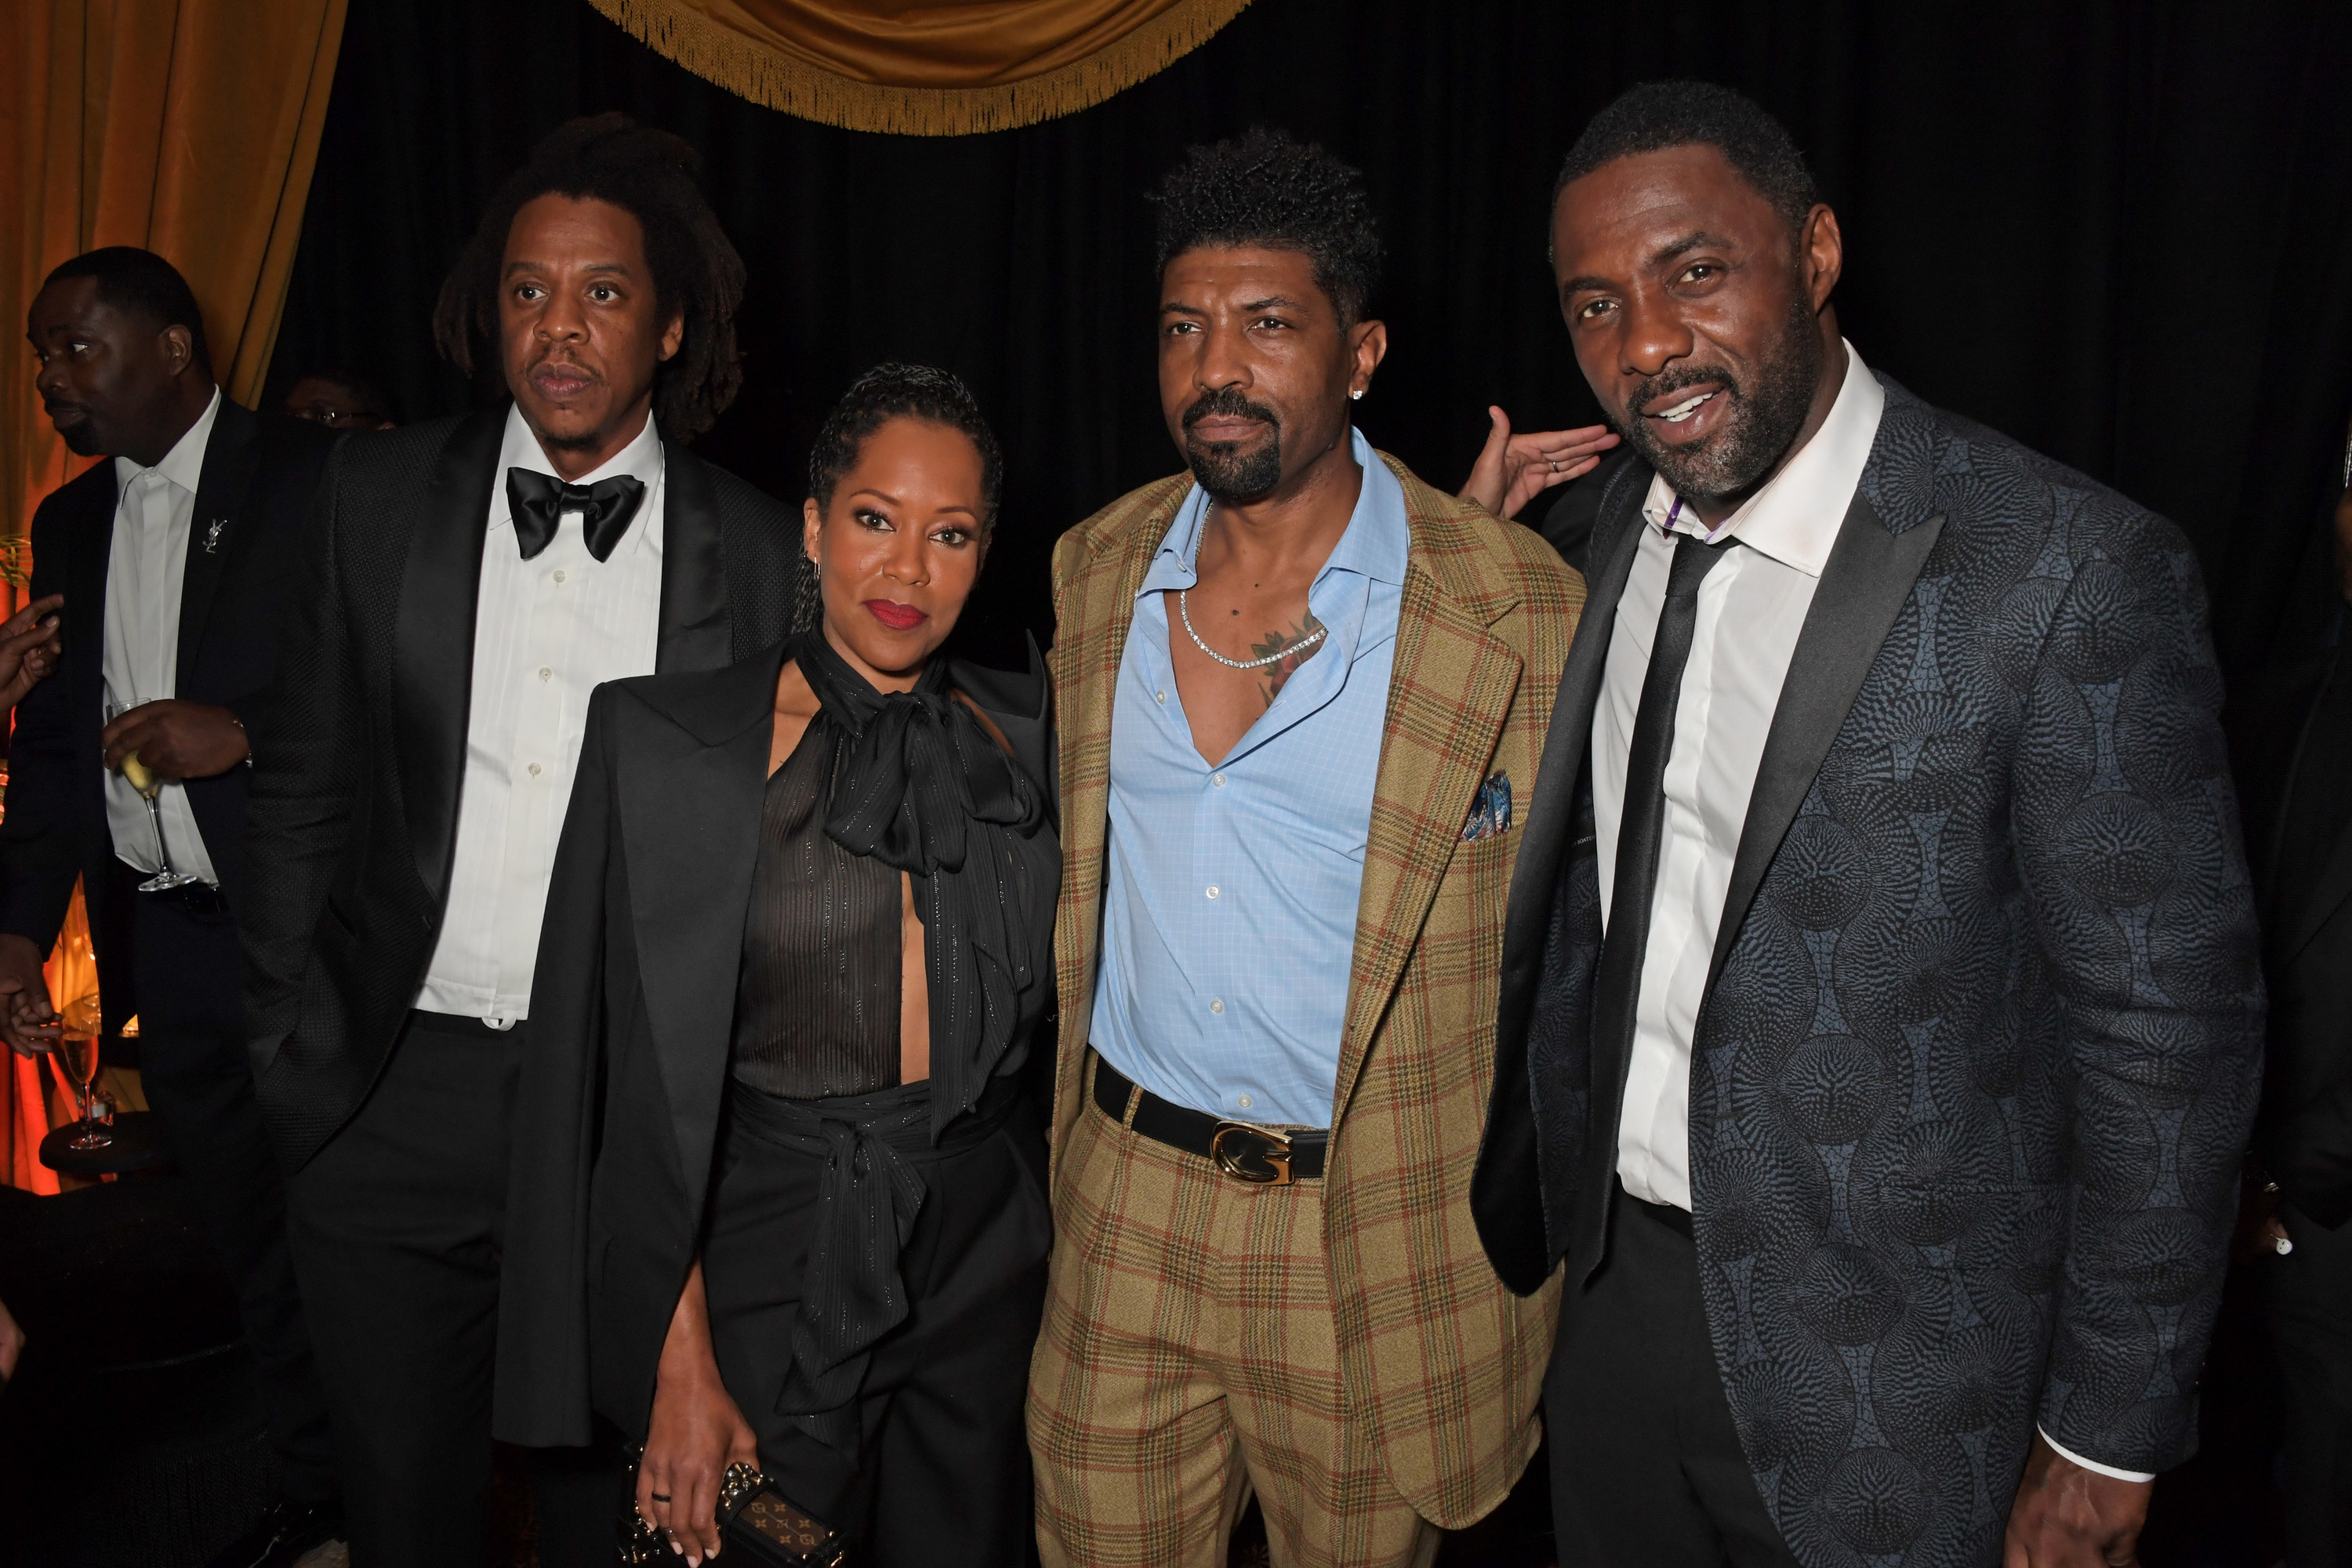 Jay-Z, Regina King, Deon Cole, and Idris Elba pose for a photo together at a Hollywood event